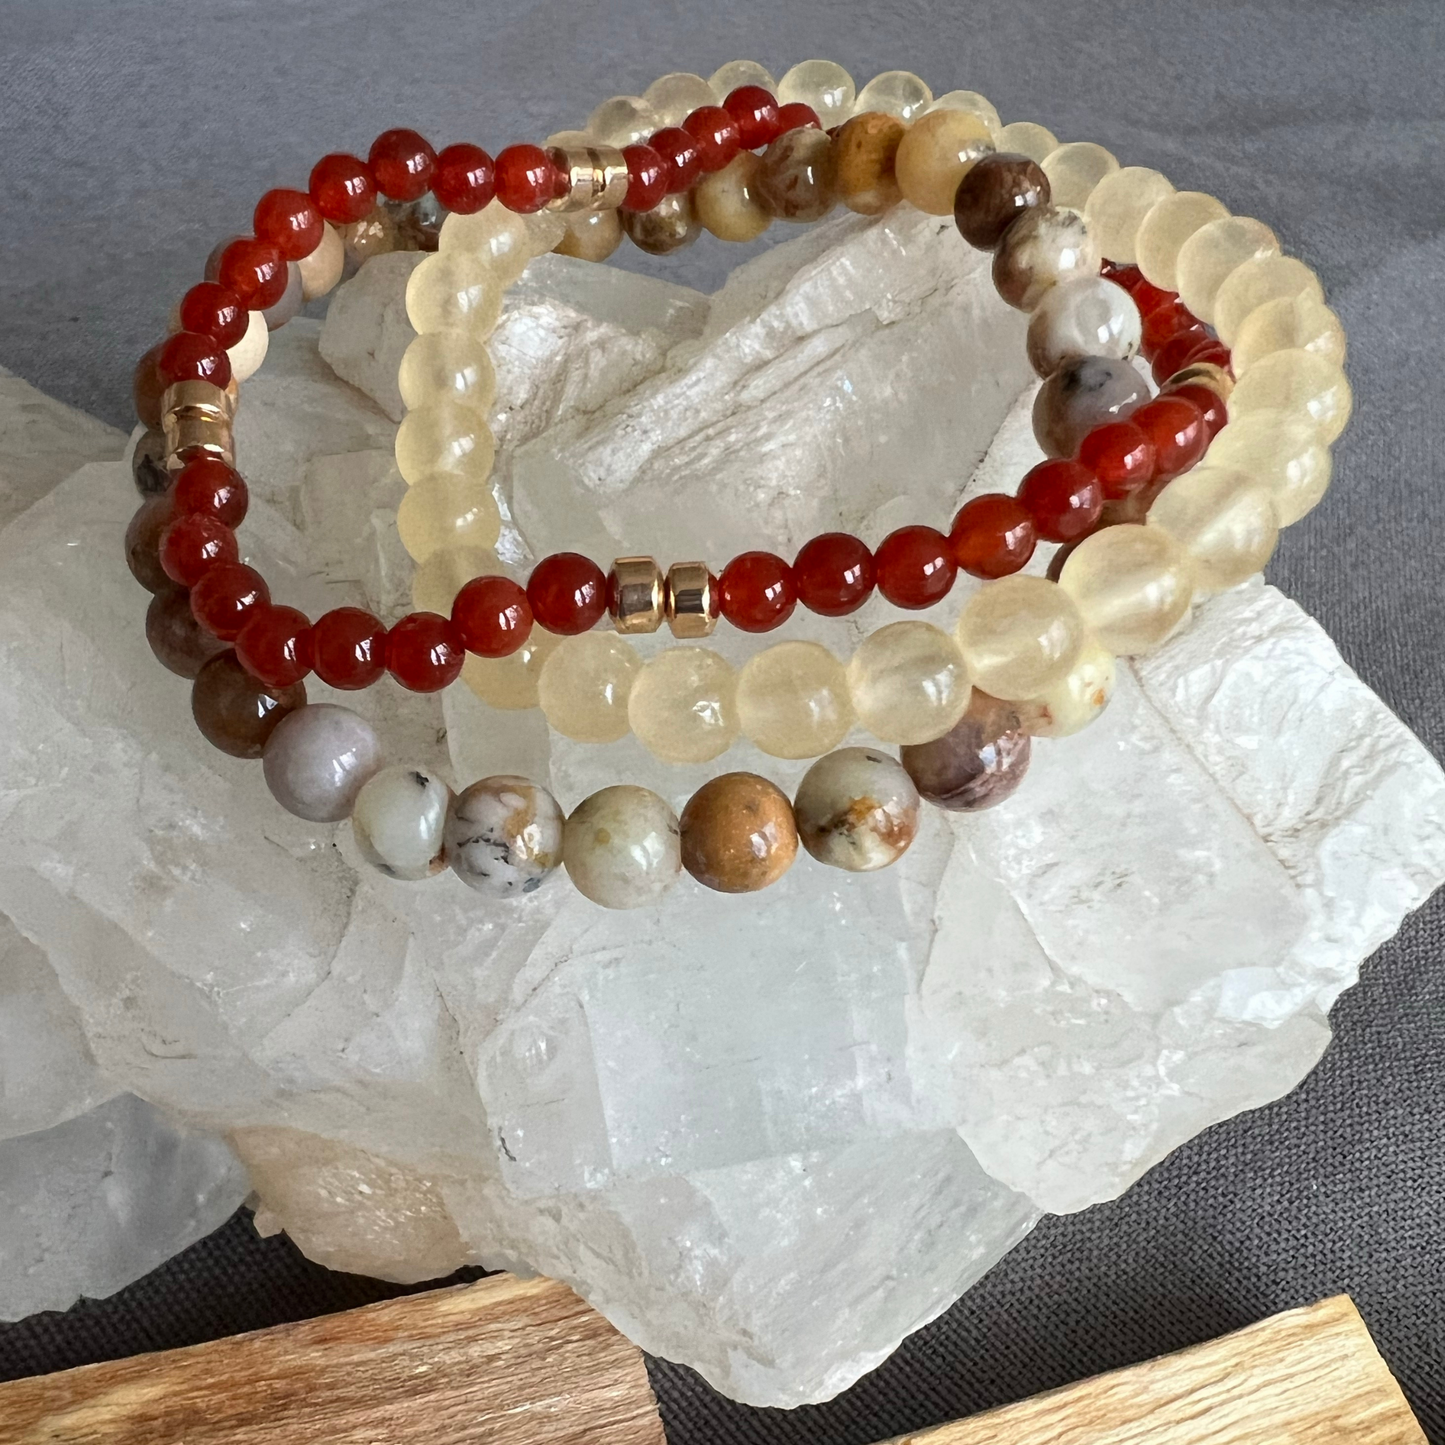 Self-Acceptance Stack: Carnelian, Crazy Lace Agate, & Golden Calcite